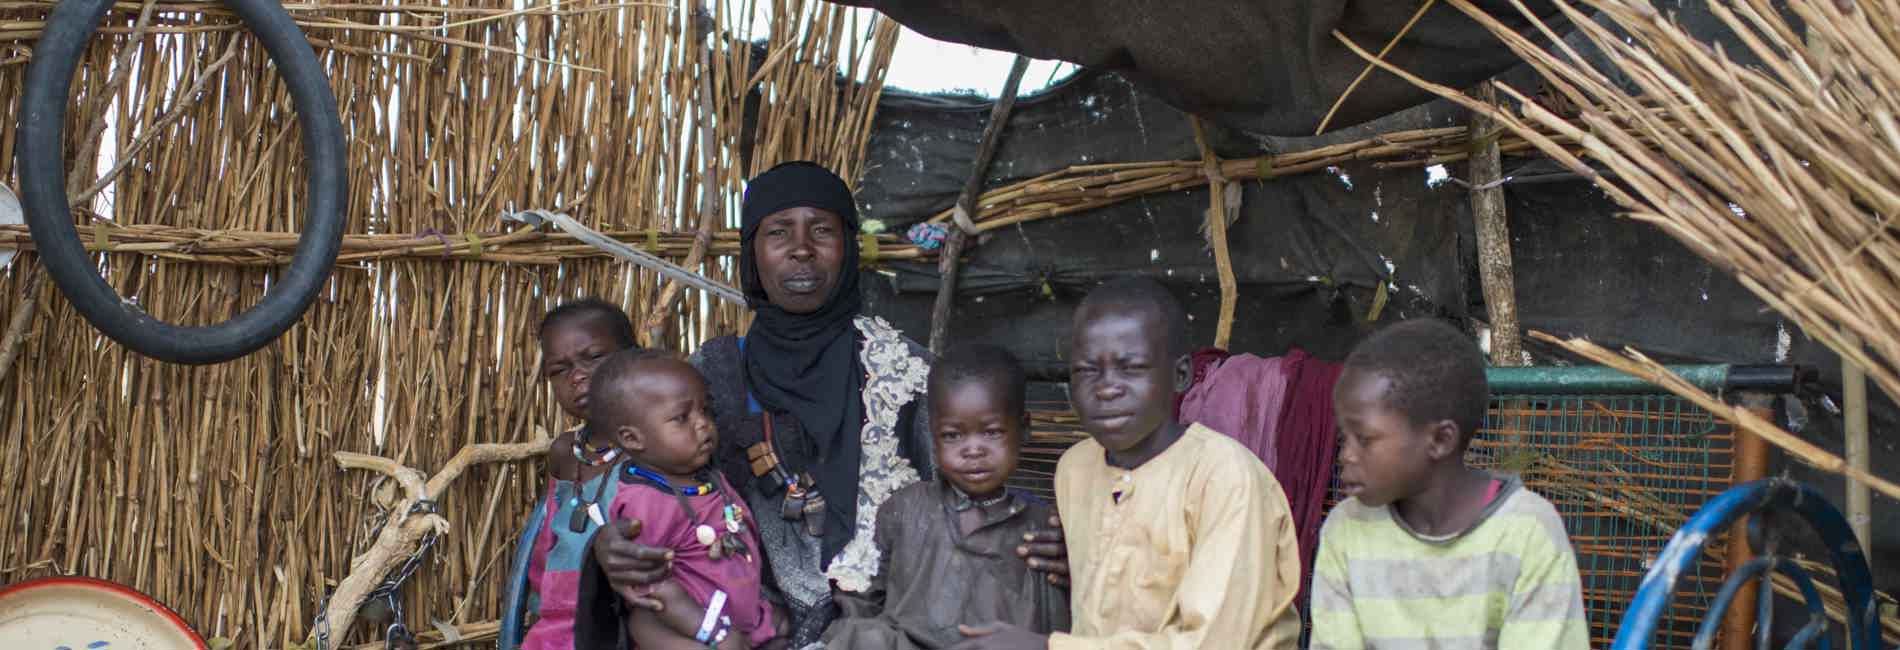 Ashta, 32, fled Tindelti, in the Darfur region of Sudan with her husband and six children